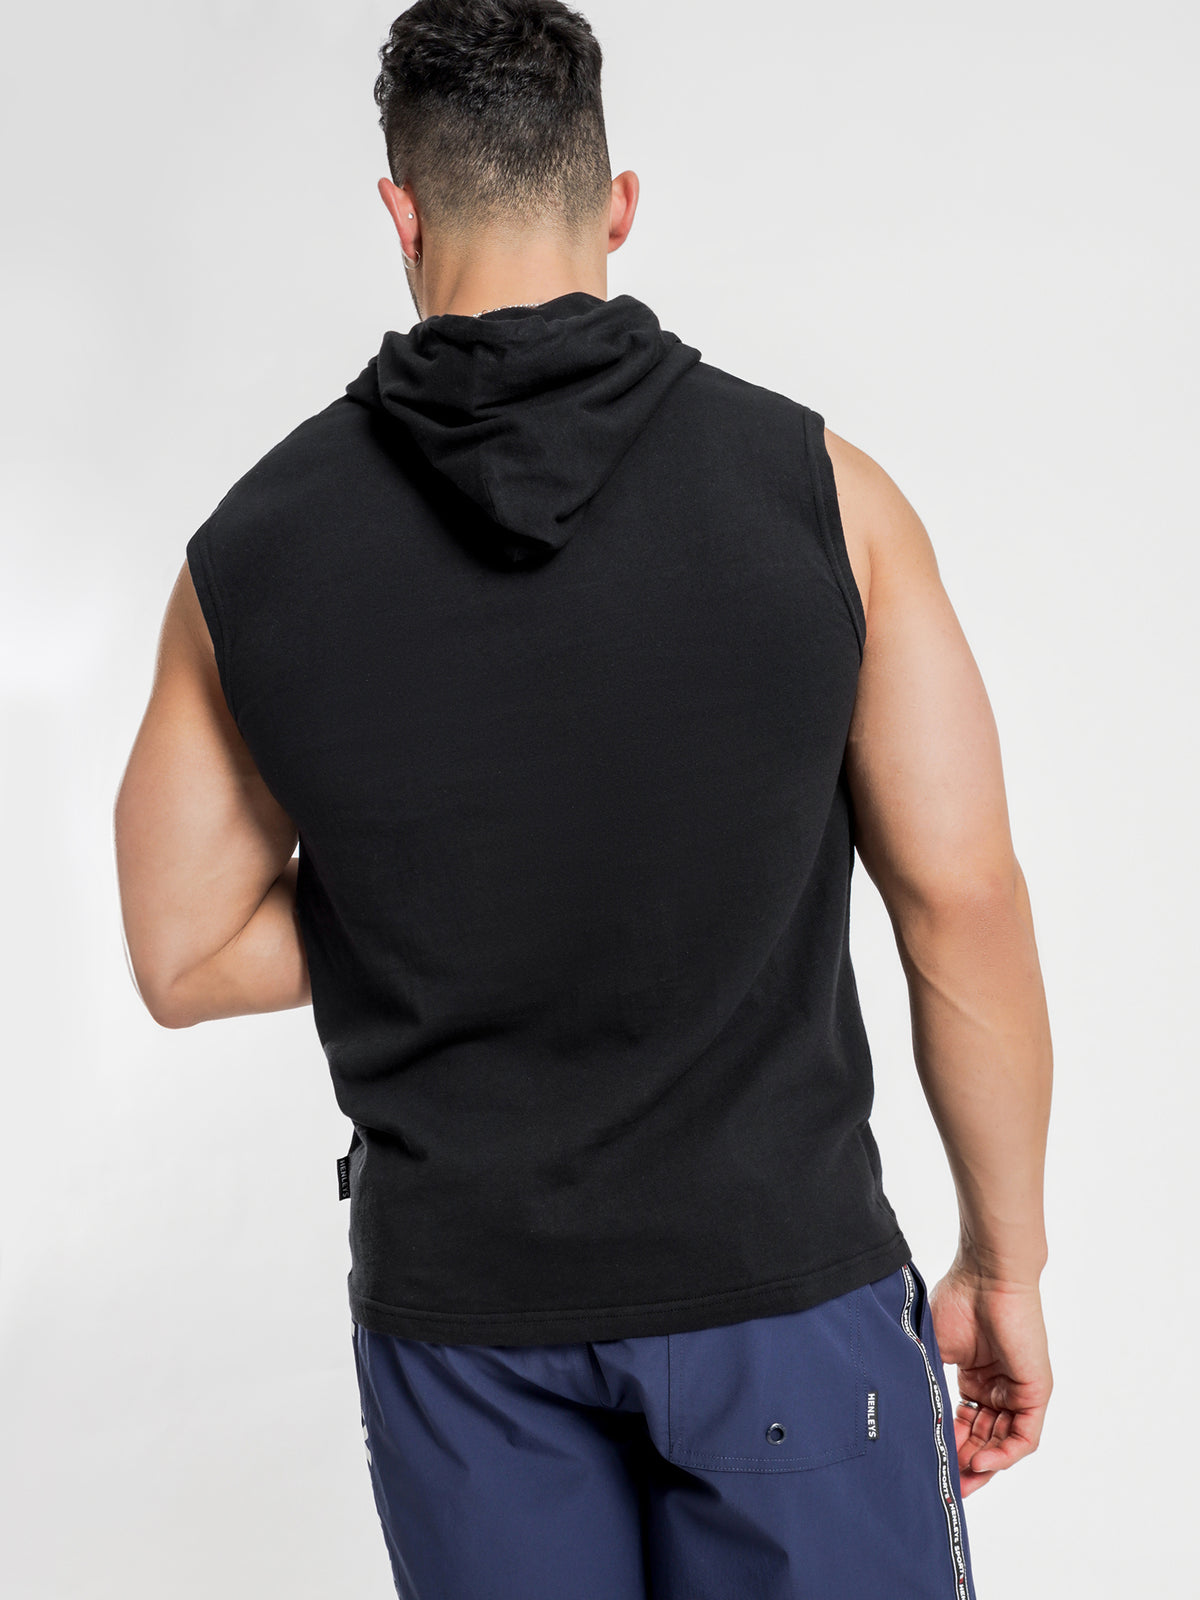 Bloc Reflective Hooded Muscle T-Shirt in Black